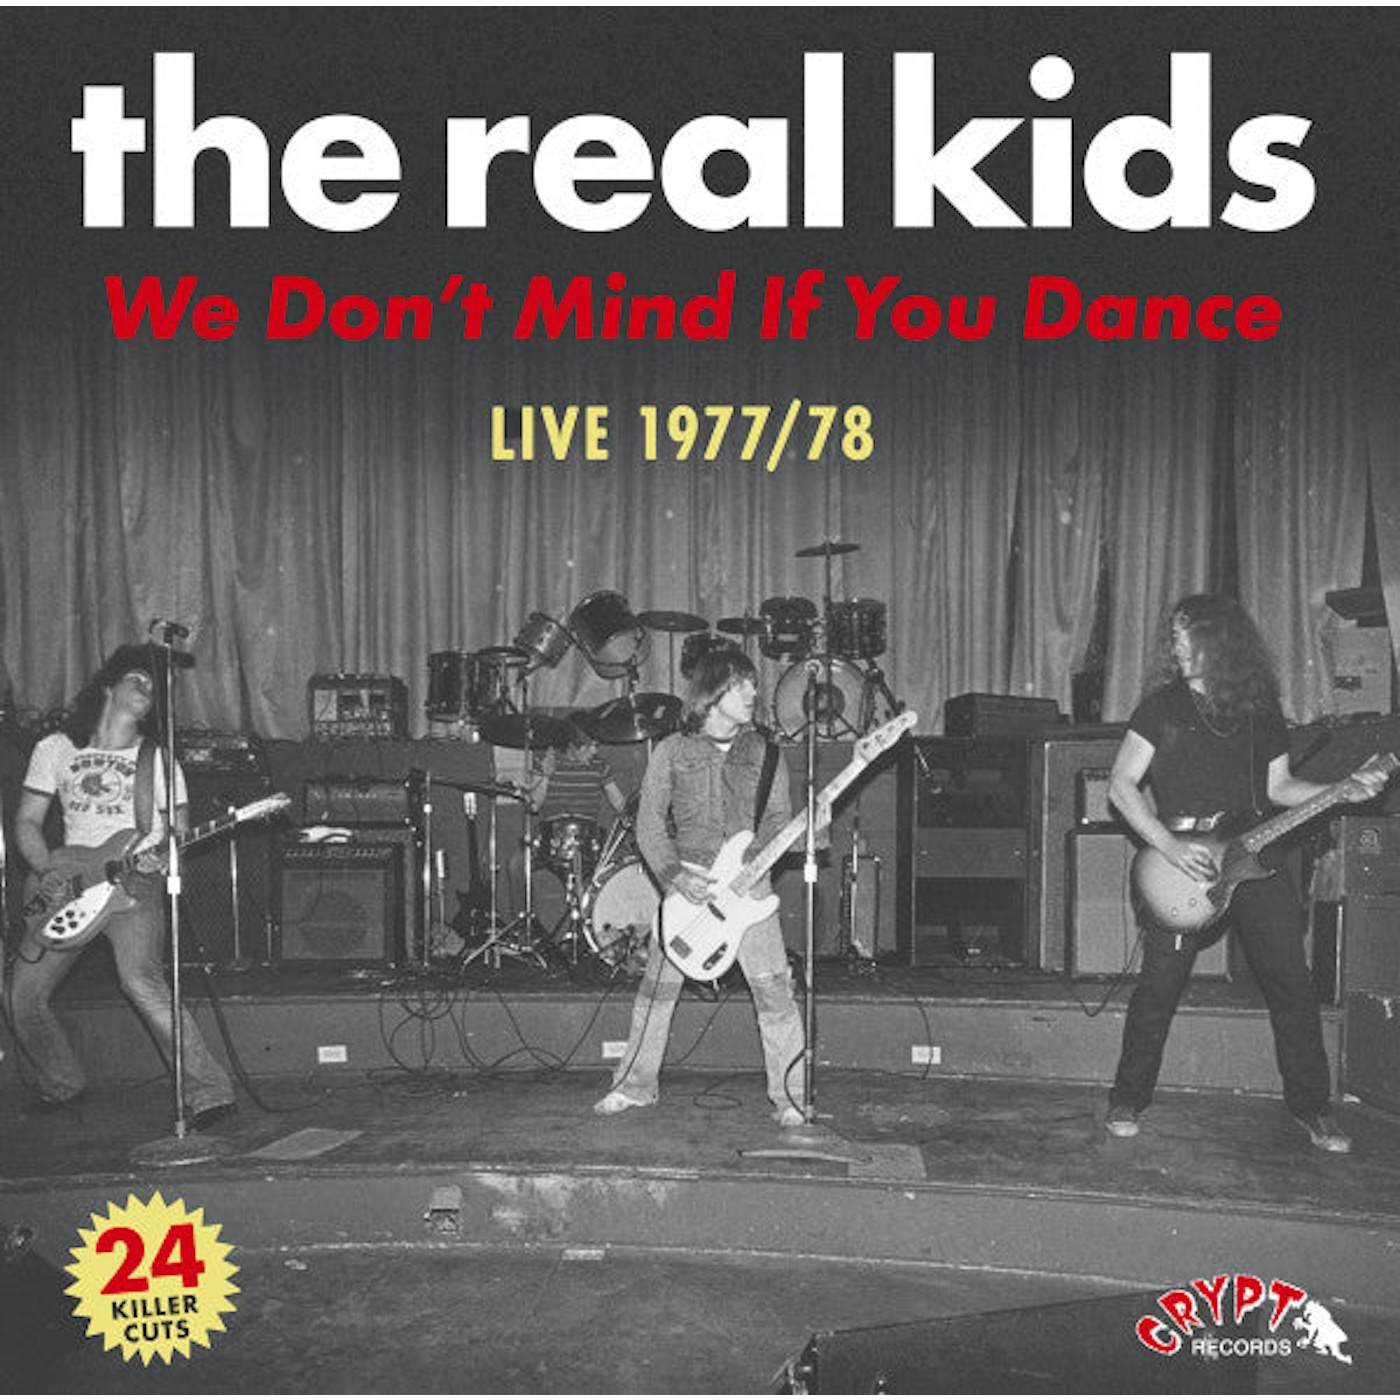 The Real Kids CD - We Don't Mind If You Dance